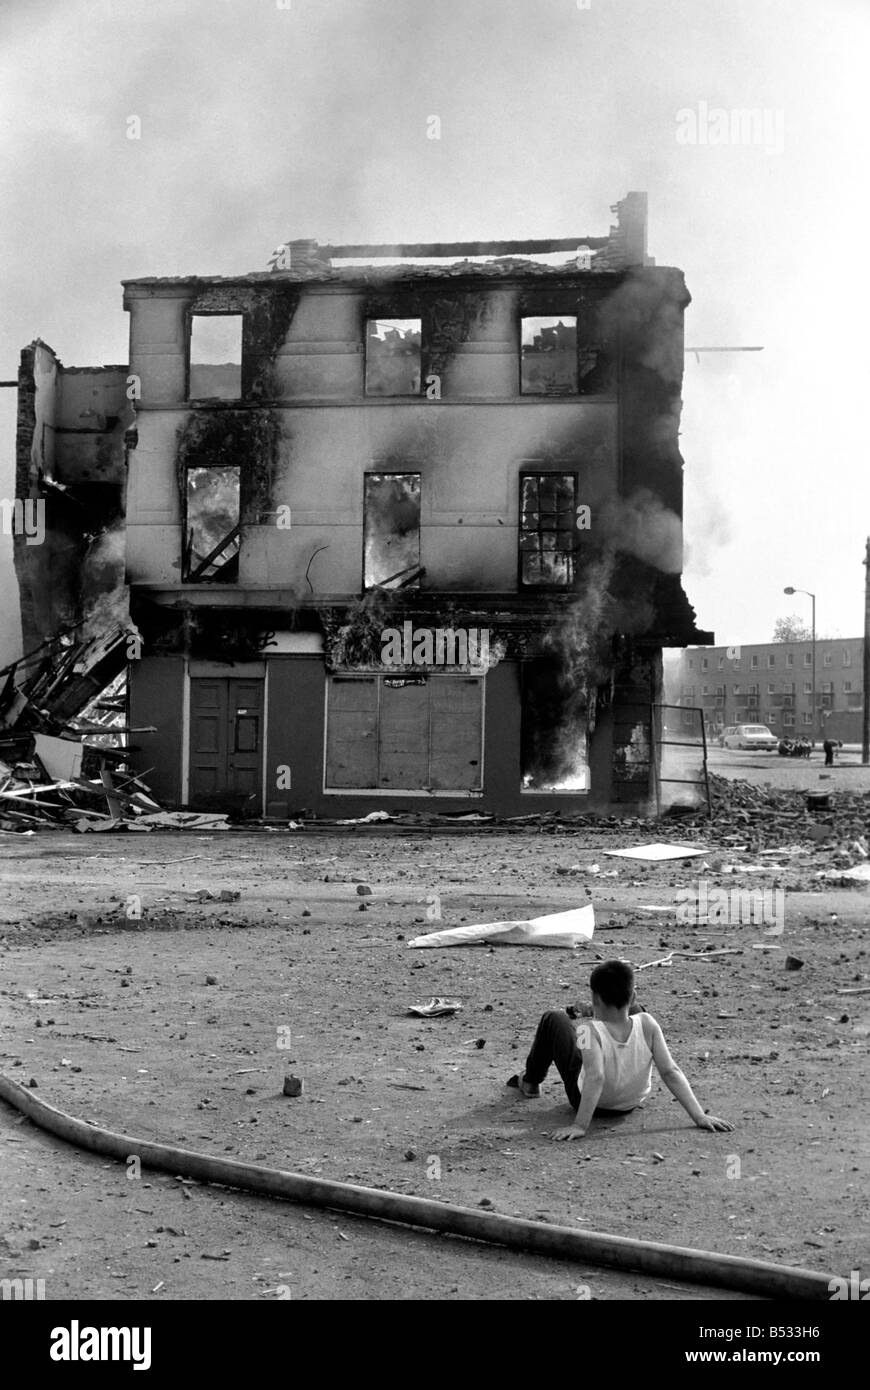 Derry fire in Northern Ireland. For one young boy - a front row seat as just one more building in his city is destroyed. This was the scene at 'aggro' corner in the Bogside as fire destroyed three more shop premises. 24 hours earlier a gelignite bomb had badly damaged the same premises. July 1972 72-7291-001 Stock Photo